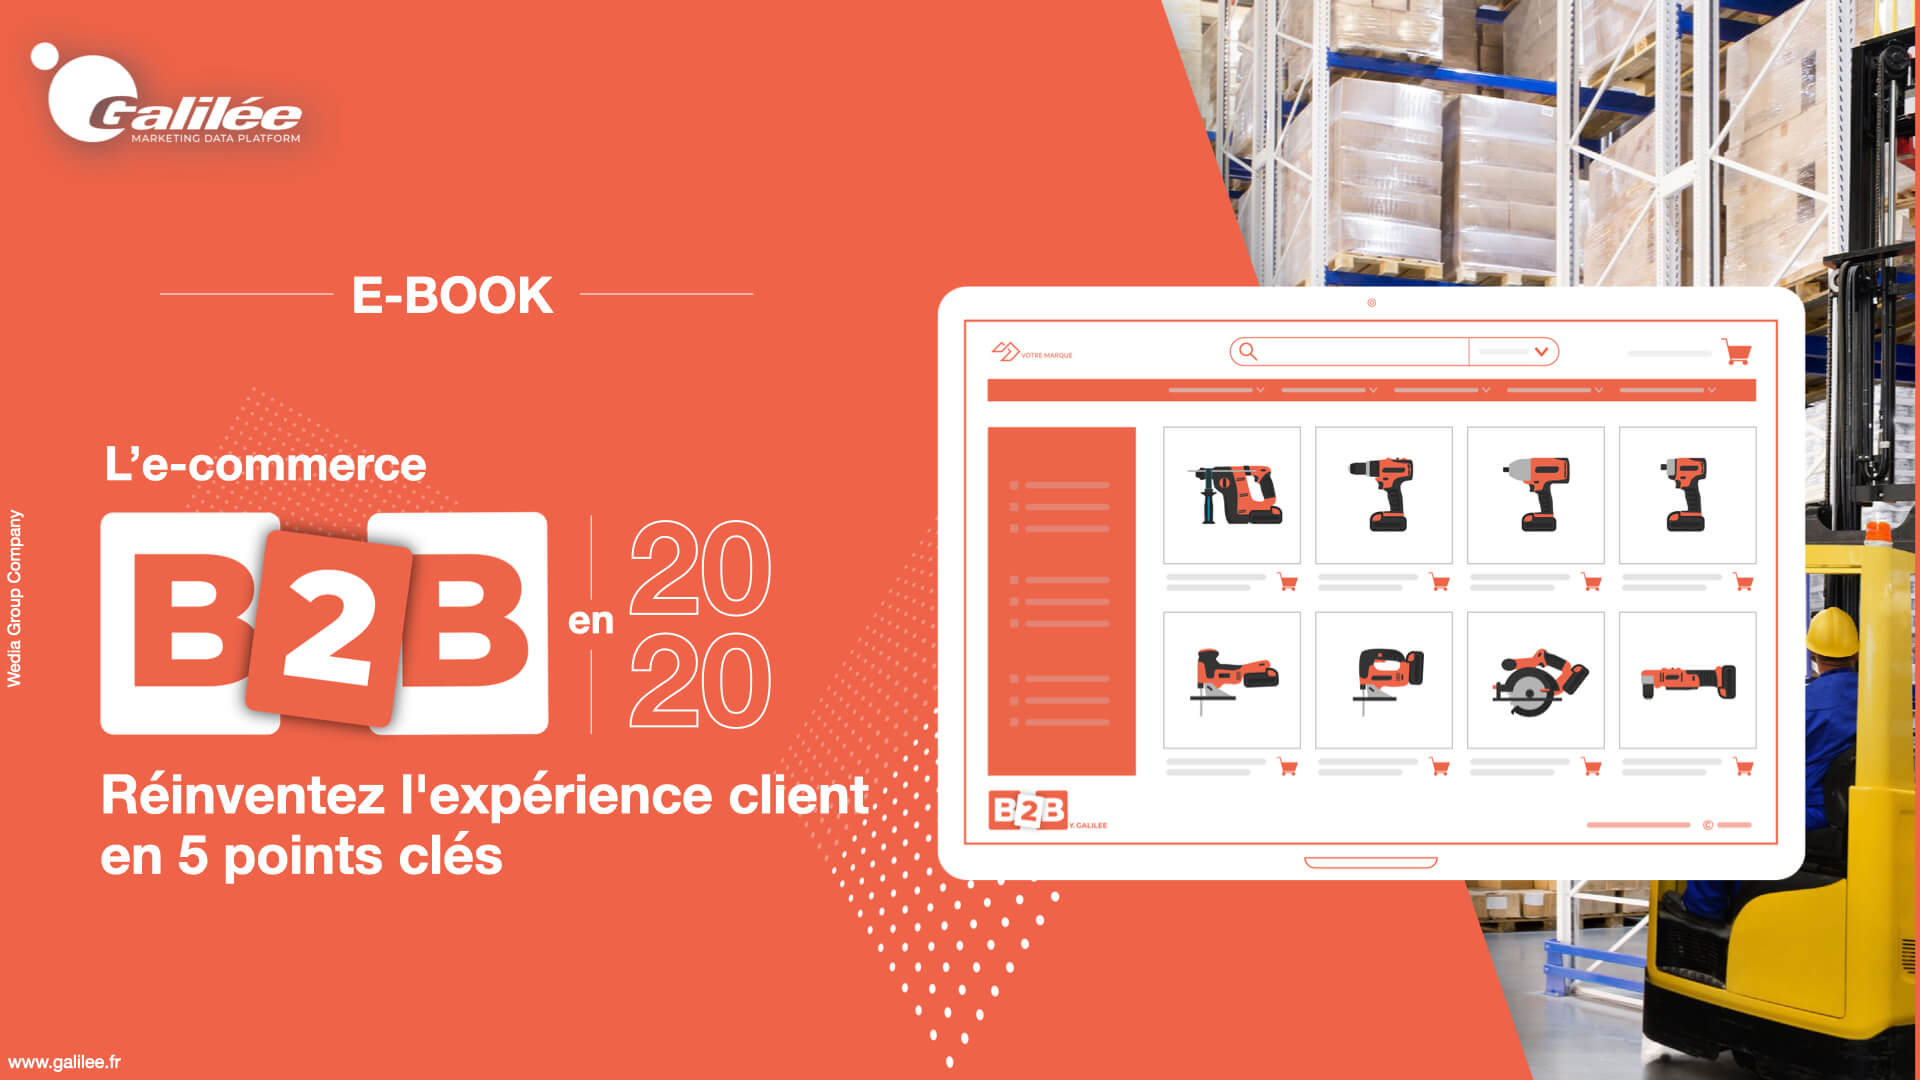 Ecommerce-b2b-experience-client.001